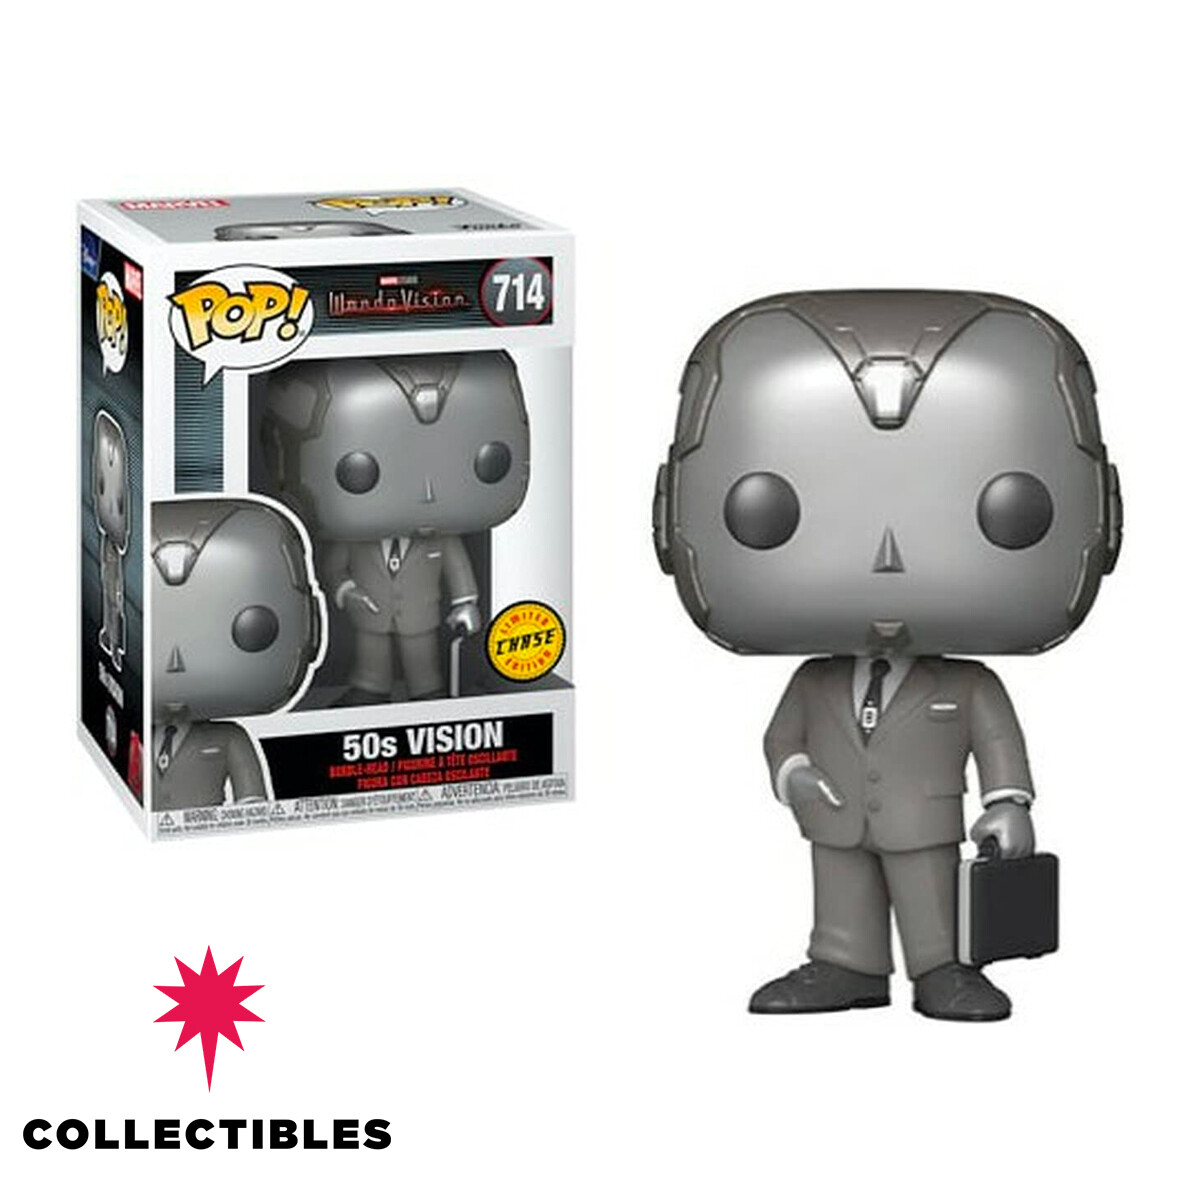 Funko Pop! WandaVision - Vision 50s Black and White Chase Figure with Robot/Andriod Head 